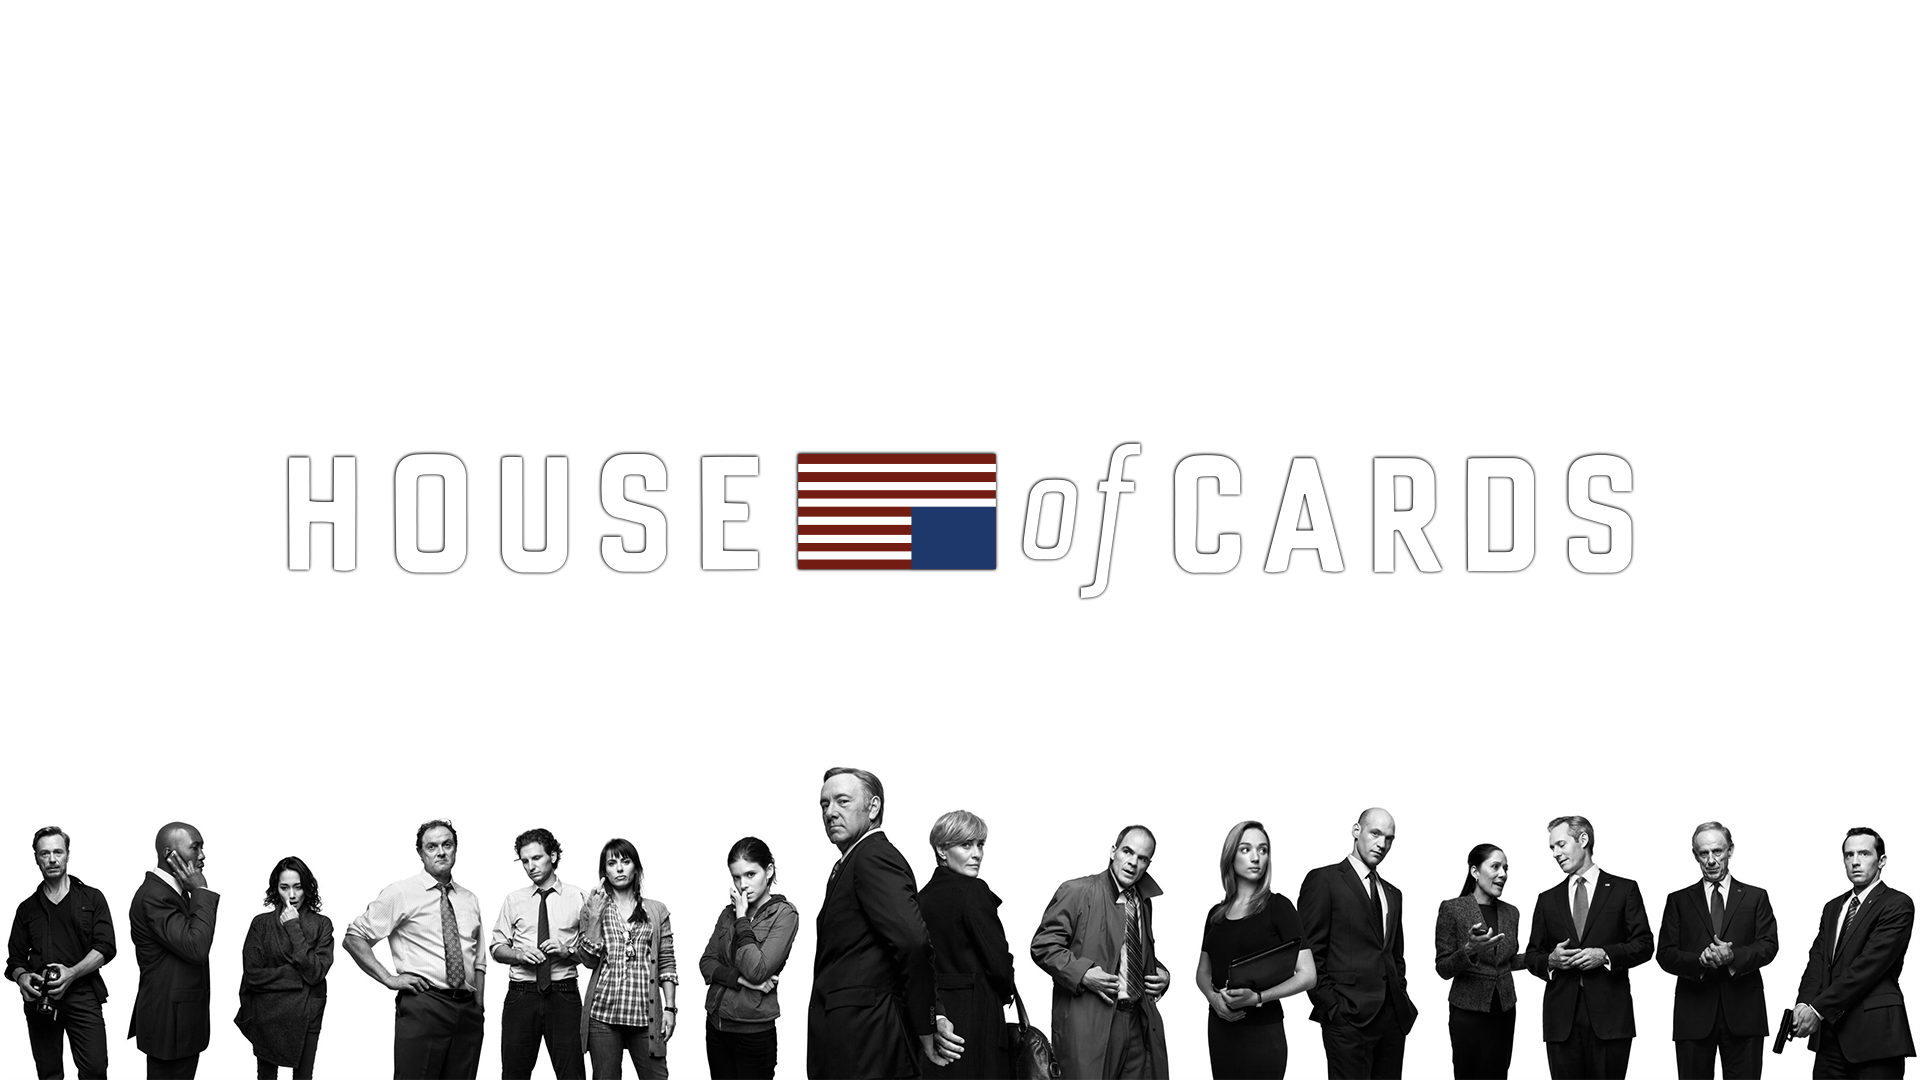 General 1920x1080 House of Cards Zoe Barnes Frank Underwood Claire Underwood Doug Stamper Kevin Spacey Robin Wright Kate Mara Netflix TV Series TV series white background flag selective coloring DeviantArt men women actor actress